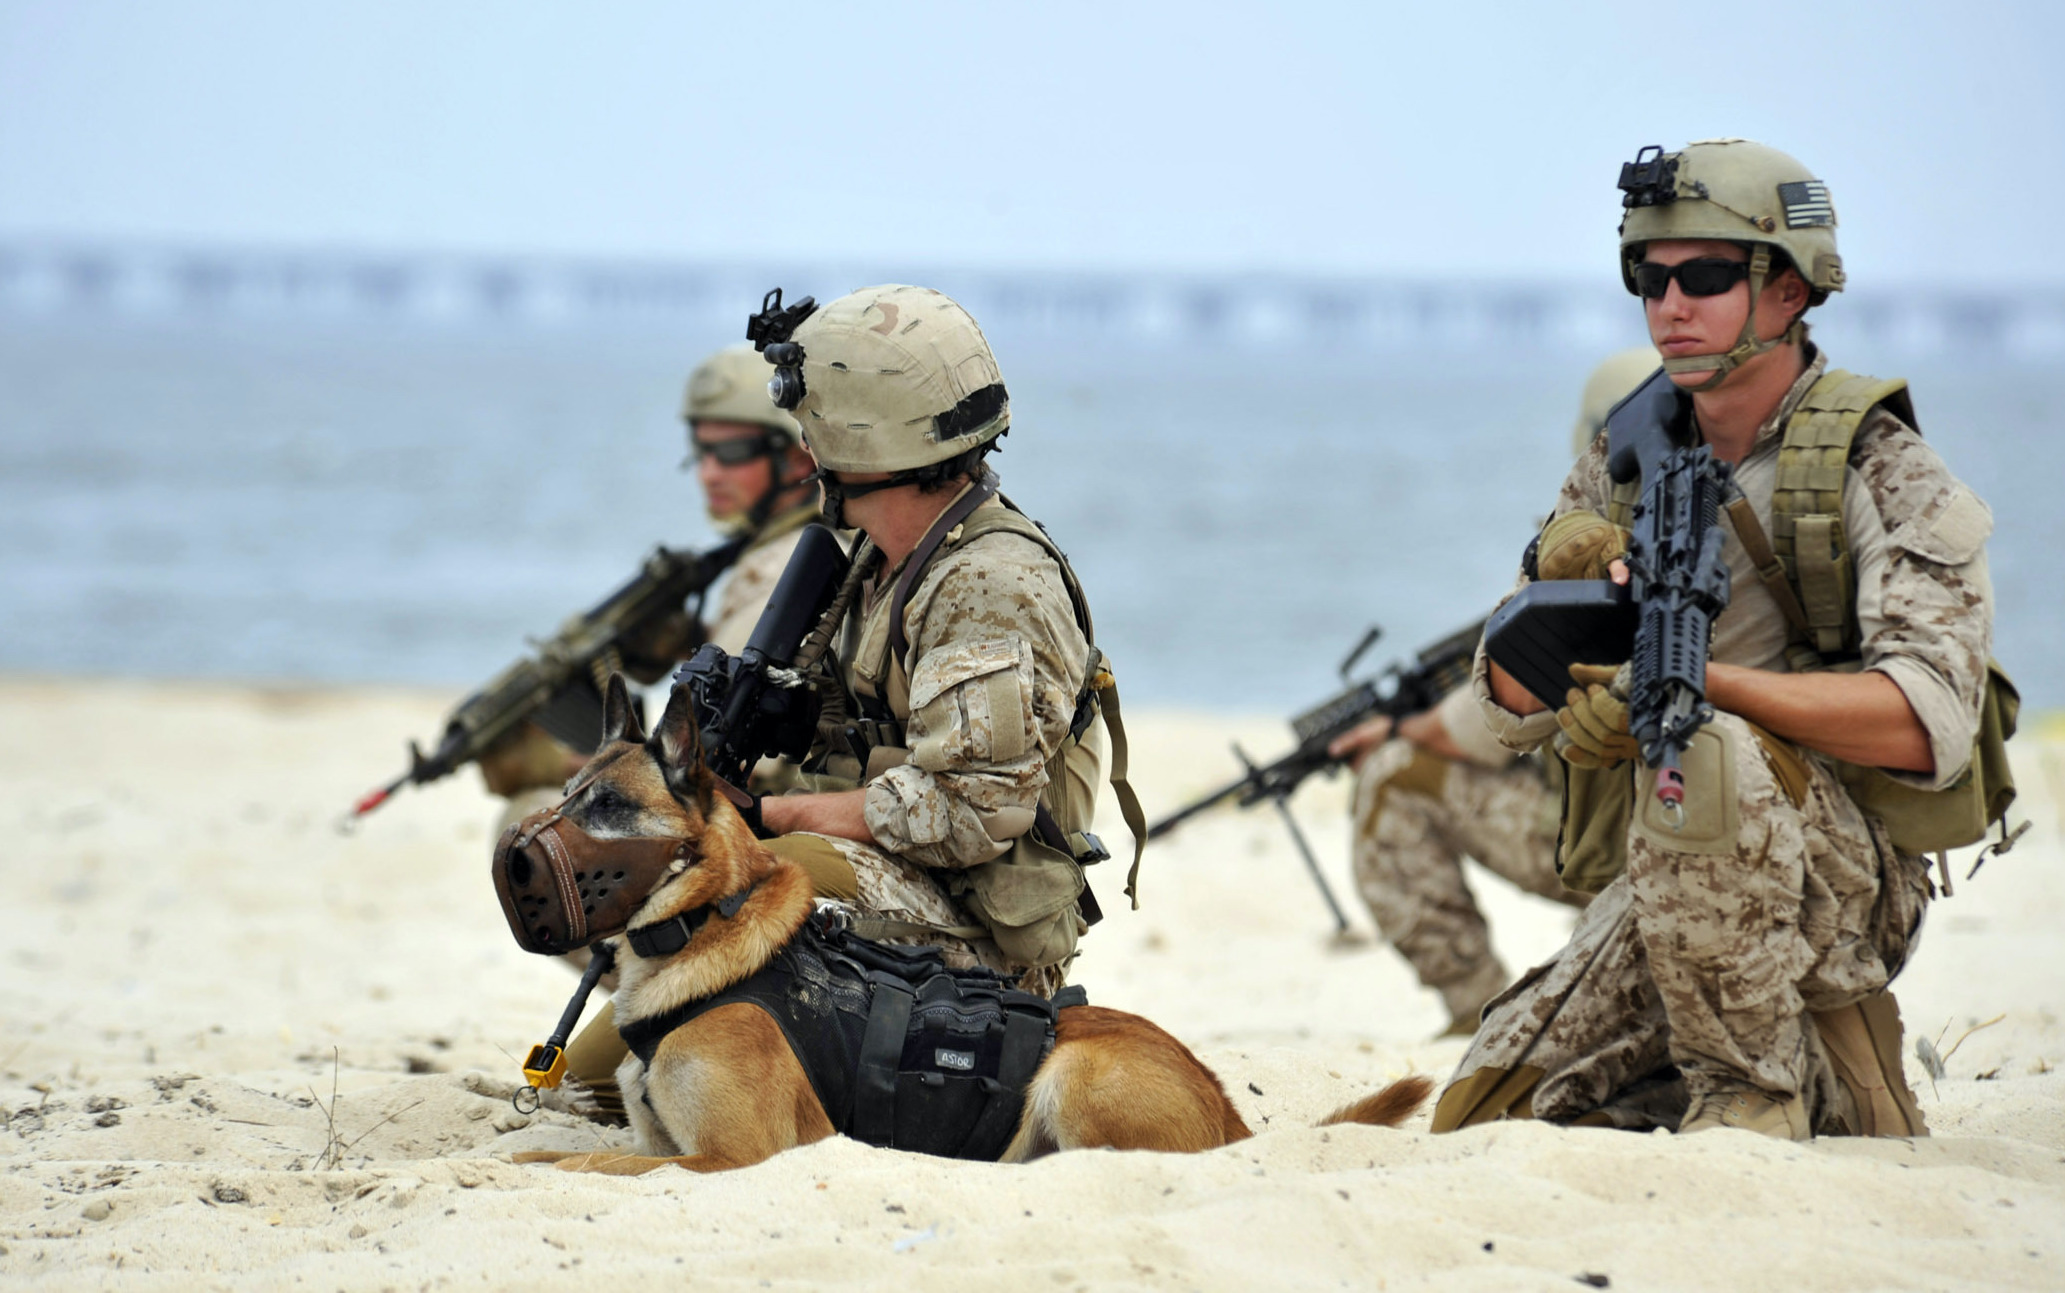 Three navy SEALs with a K-9 kneel in the sand.